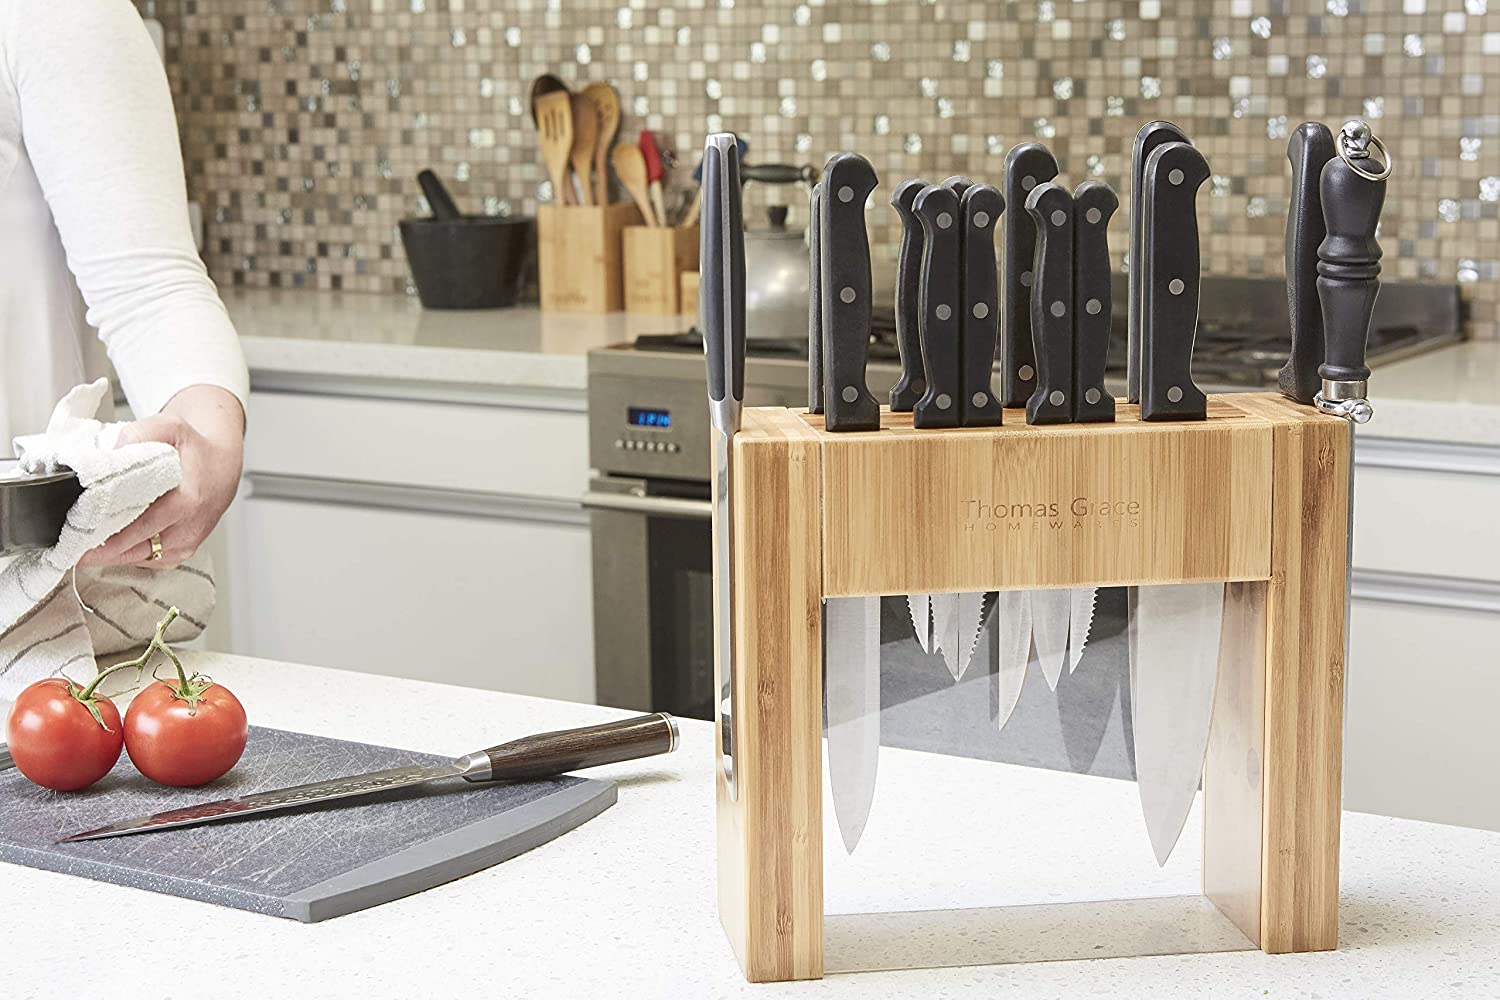 11 Slot Bamboo Knife Block w/ Magnetic Sides - Thomas Grace Homewares Kitchen Universal Knife Holder Organizer (KNIFE BLOCK WITHOUT KNIVES). Magnetic Knife Block Strip Boosts Storage to 15 Knives